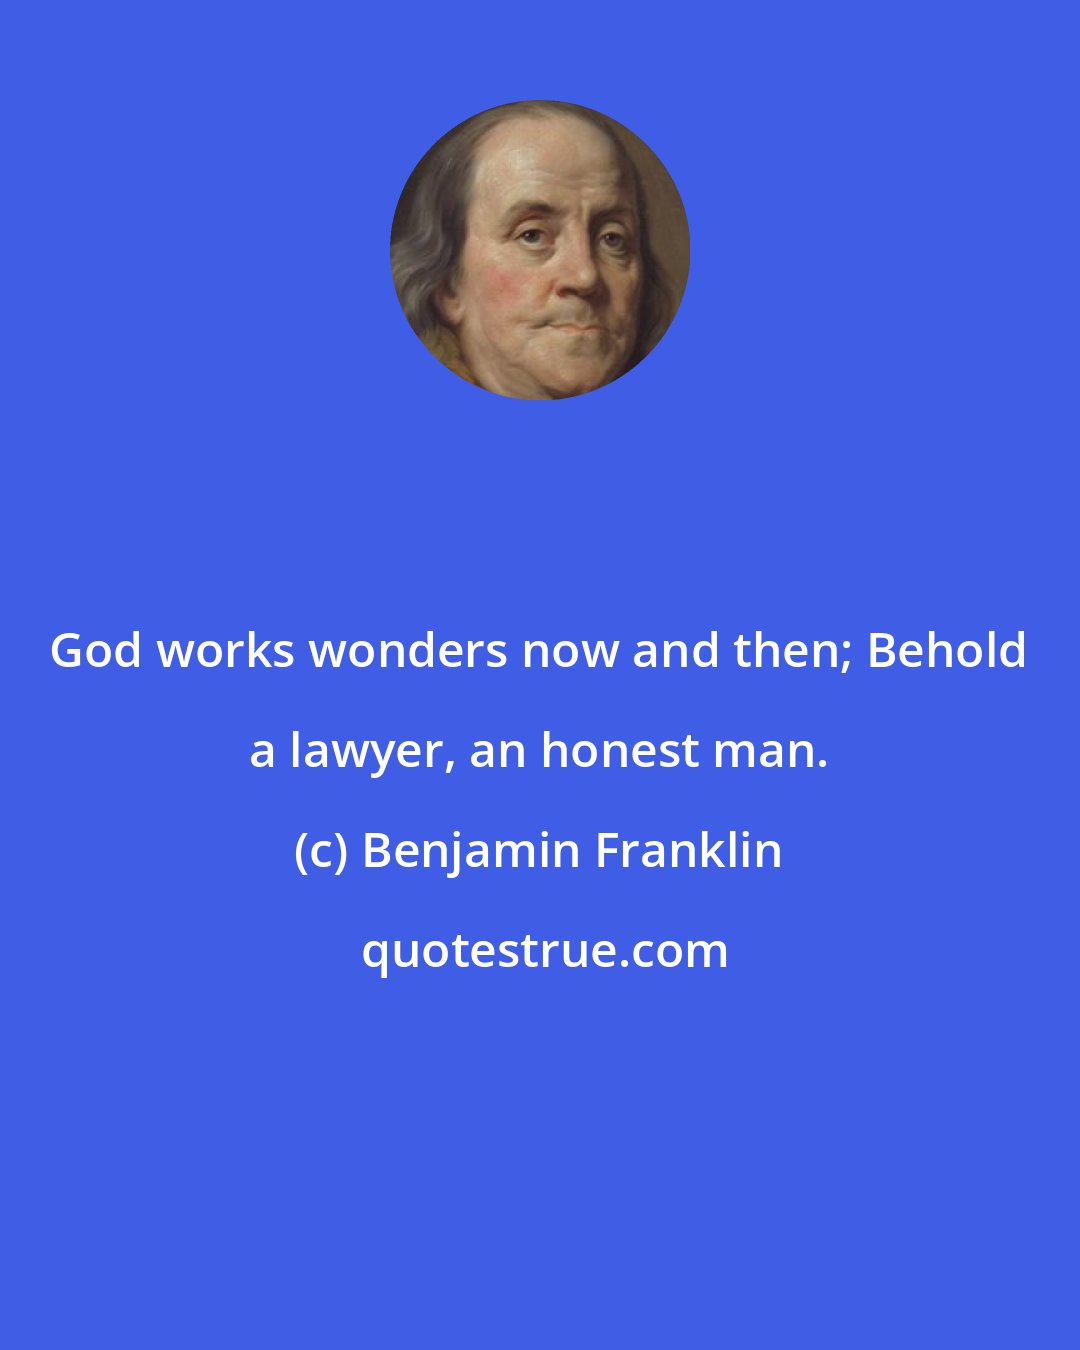 Benjamin Franklin: God works wonders now and then; Behold a lawyer, an honest man.